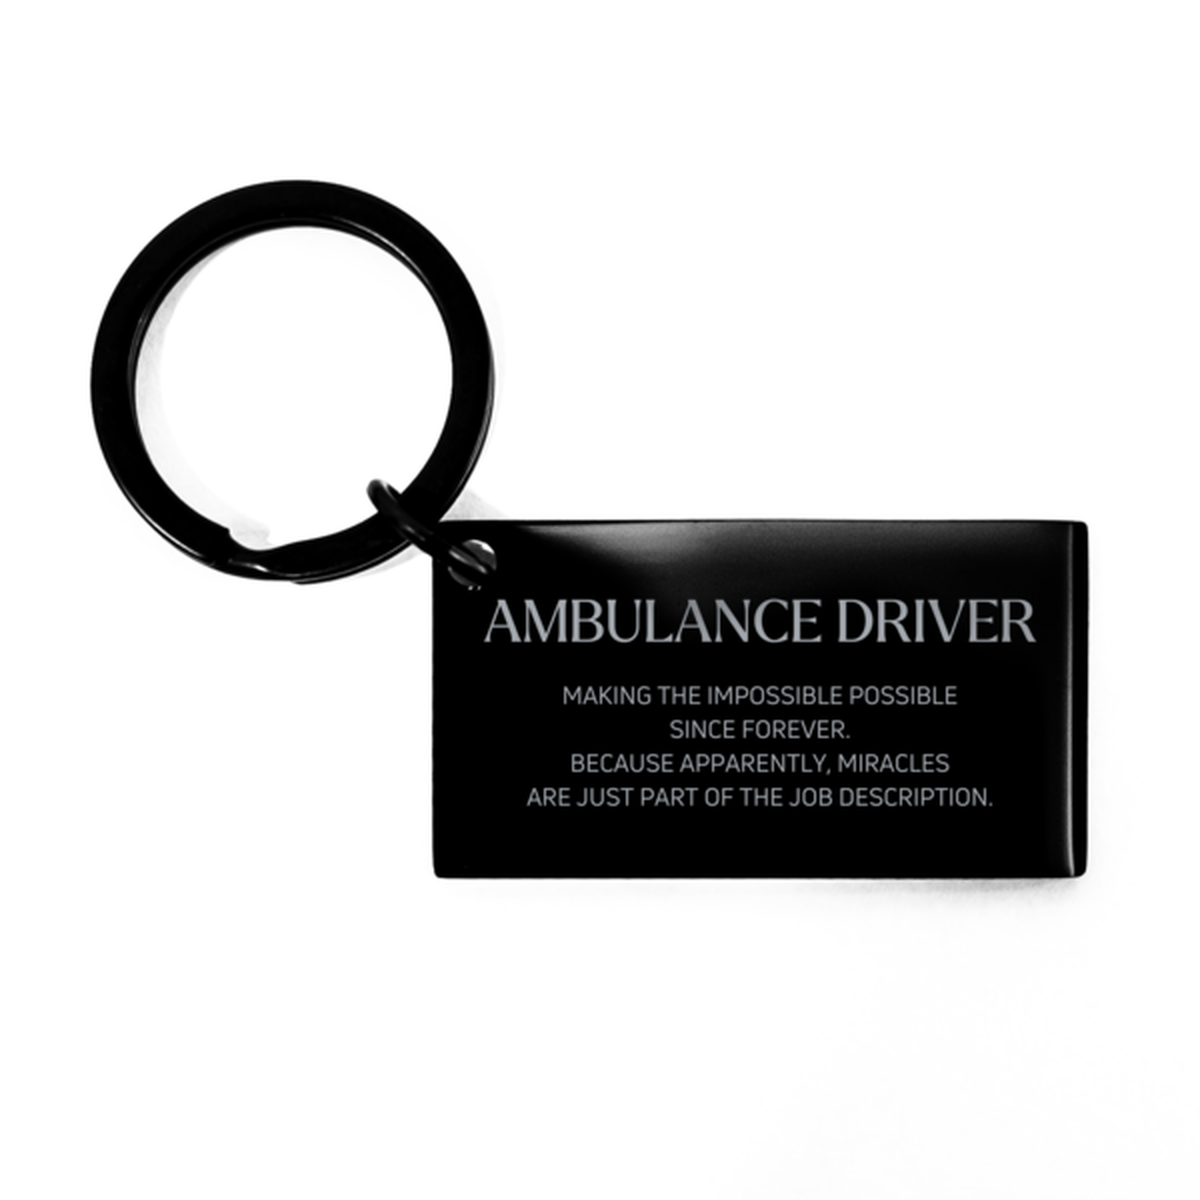 Funny Ambulance Driver Gifts, Miracles are just part of the job description, Inspirational Birthday Keychain For Ambulance Driver, Men, Women, Coworkers, Friends, Boss